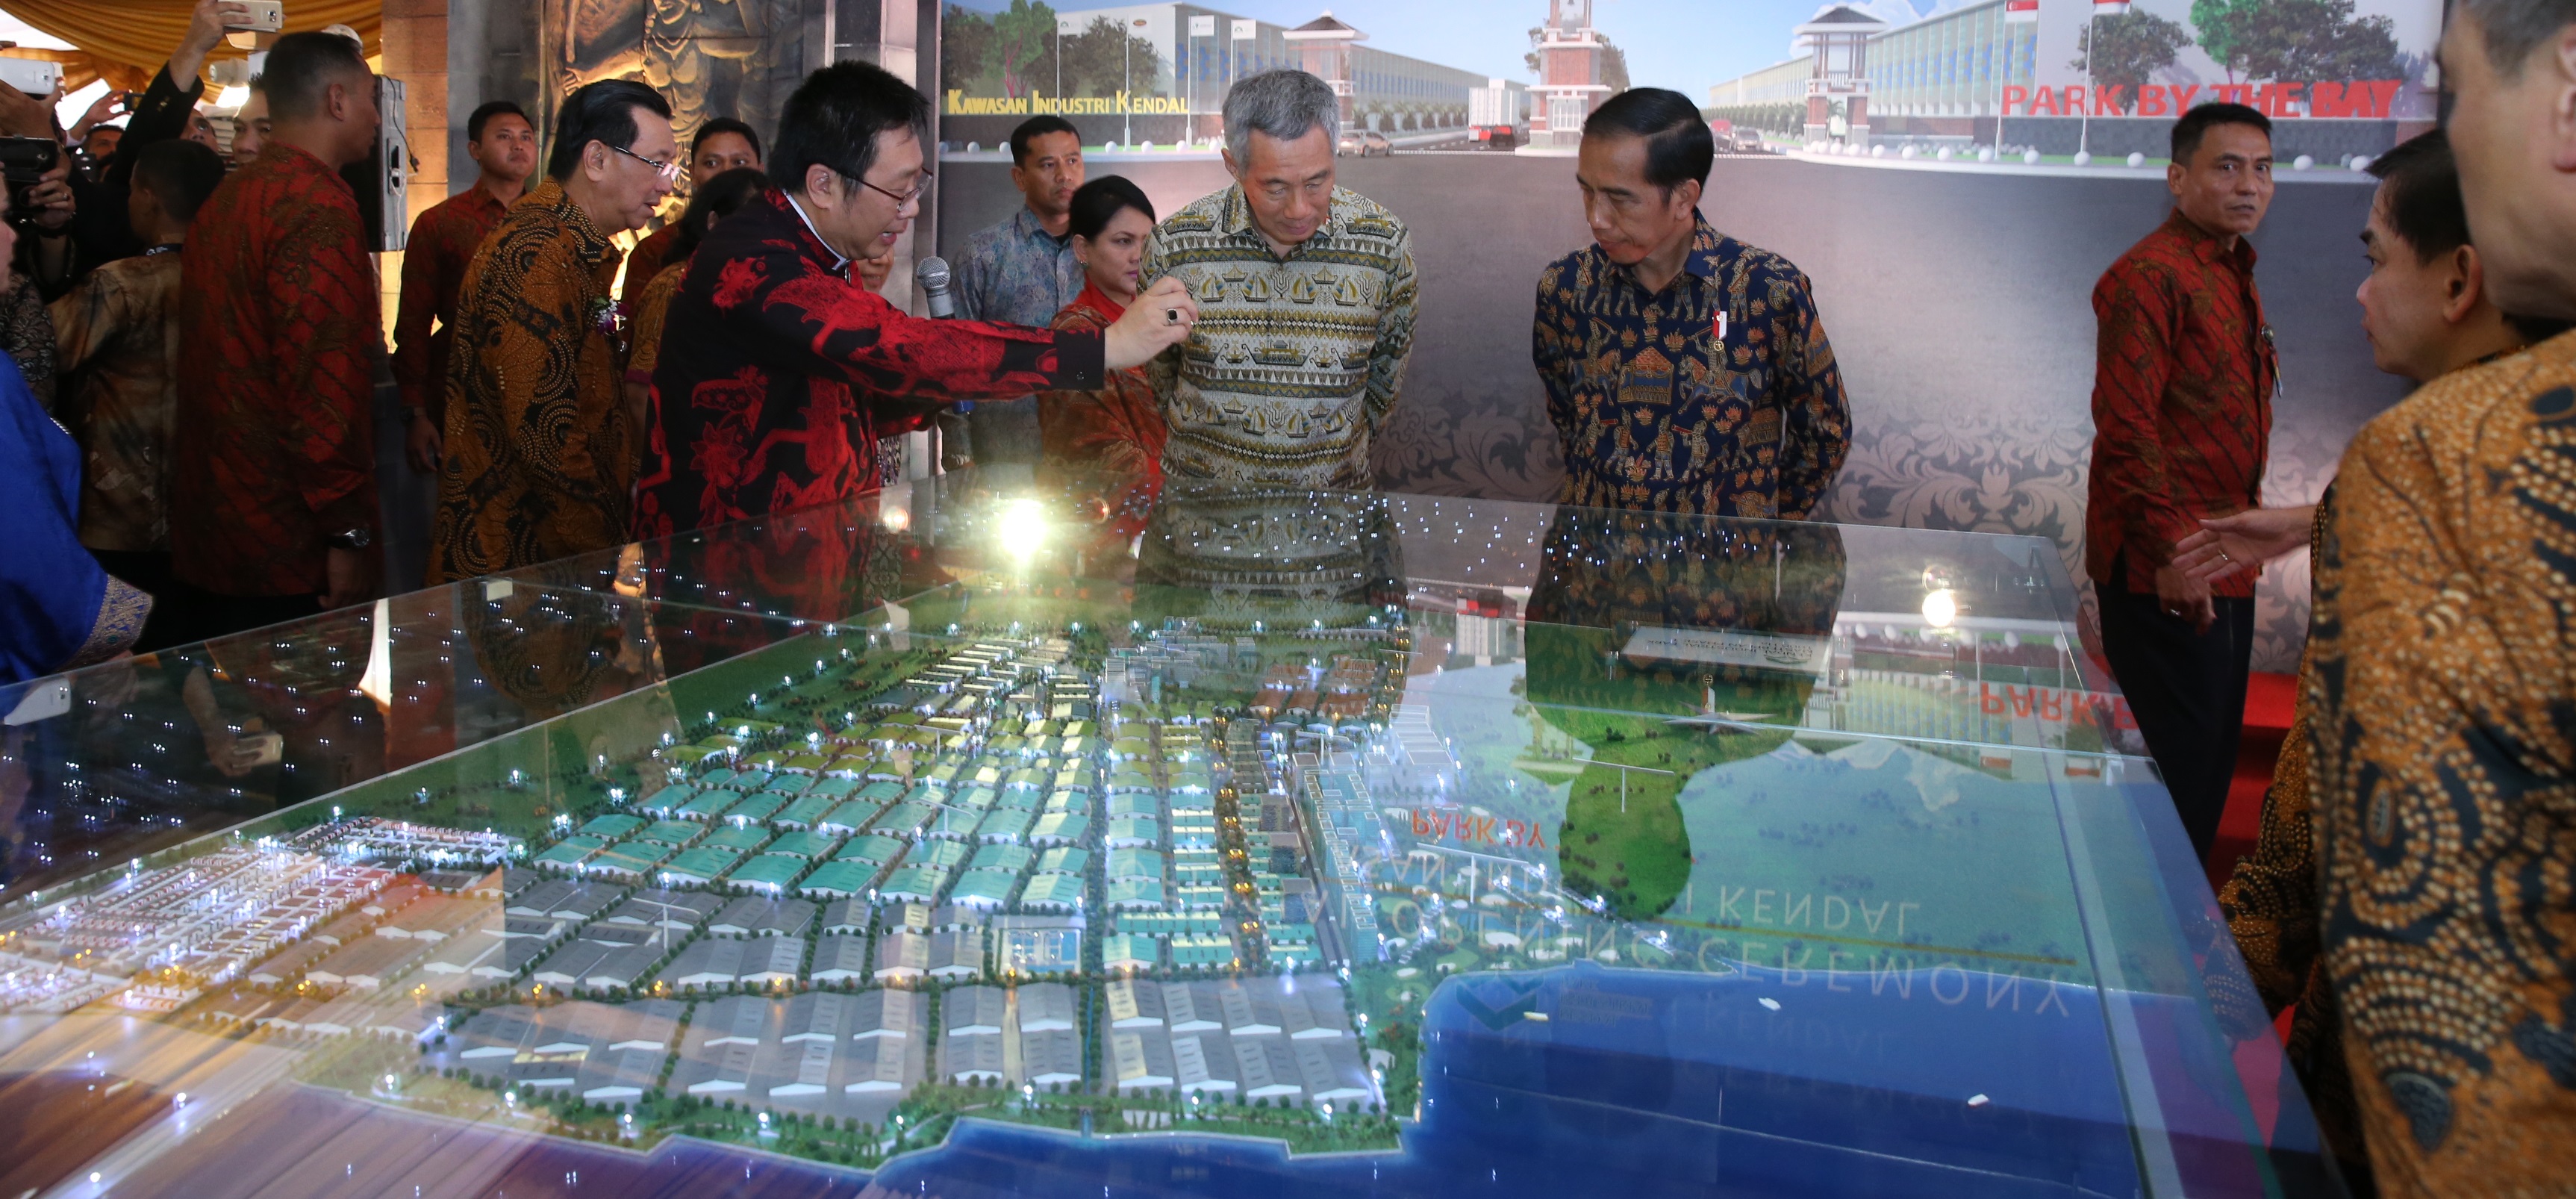 PM Lee Hsien Loong at the Opening of Kendal Industrial Park